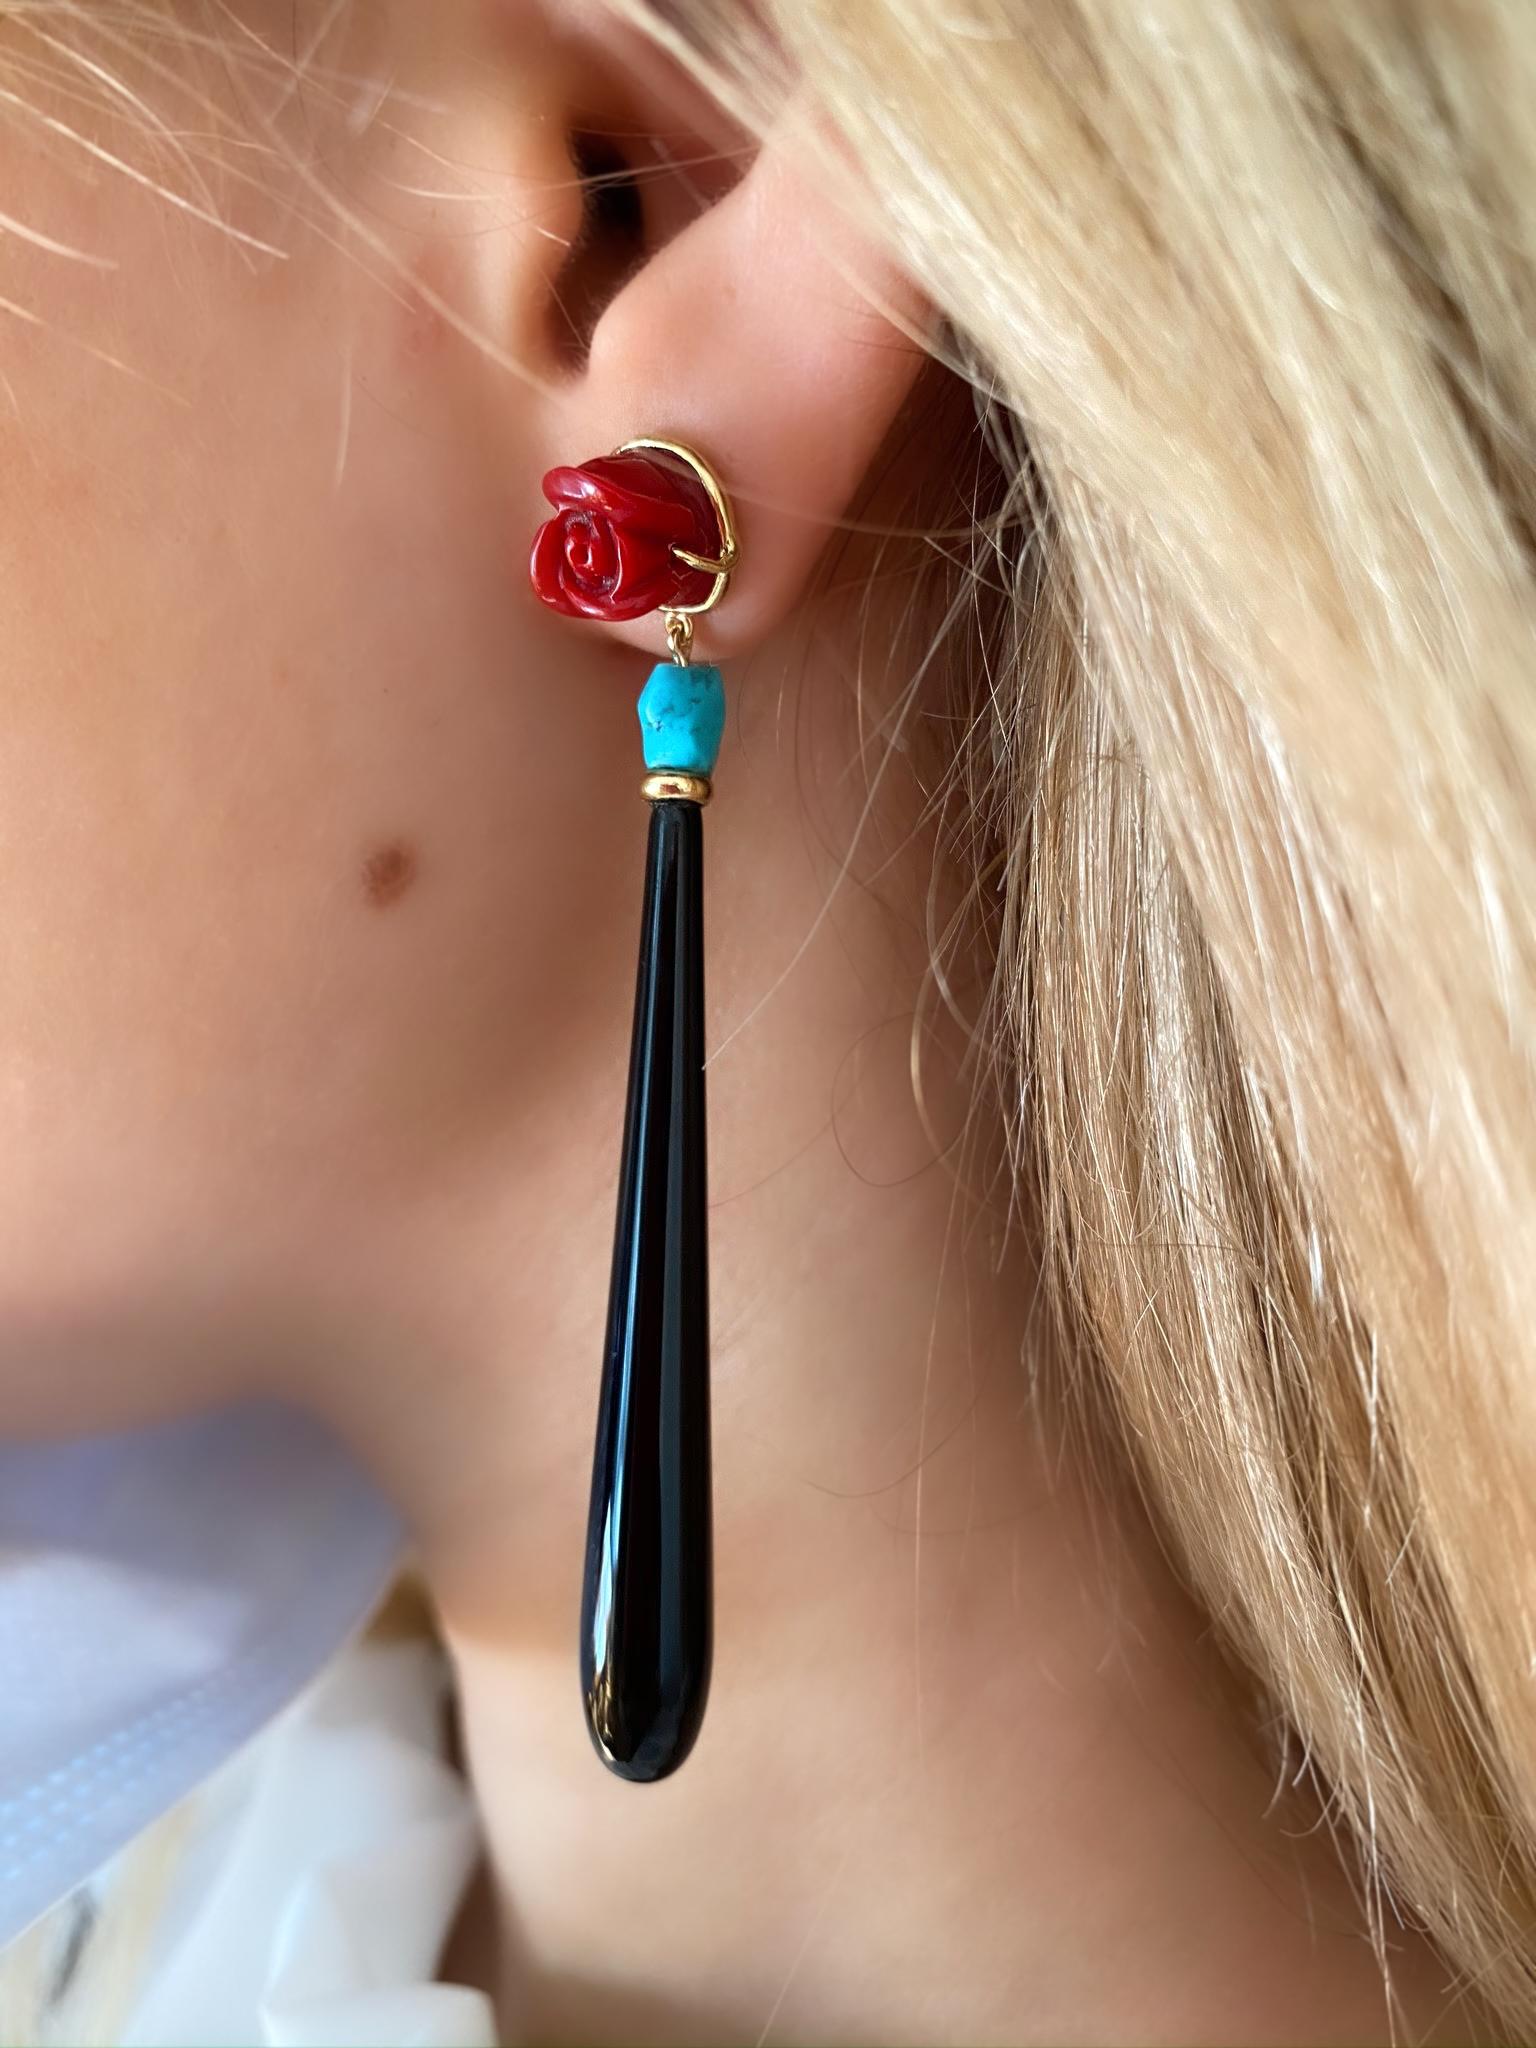 Rossella Ugolini Design Collection, Art Deco Style 18 Karat Yellow Gold Onyx Drops Coral Red Roses  Flower natural Turquoise beads Dangle Design Earrings.
A geometric shape characterized by its elegant sinuosity, femininity and delicacy. 
Clean